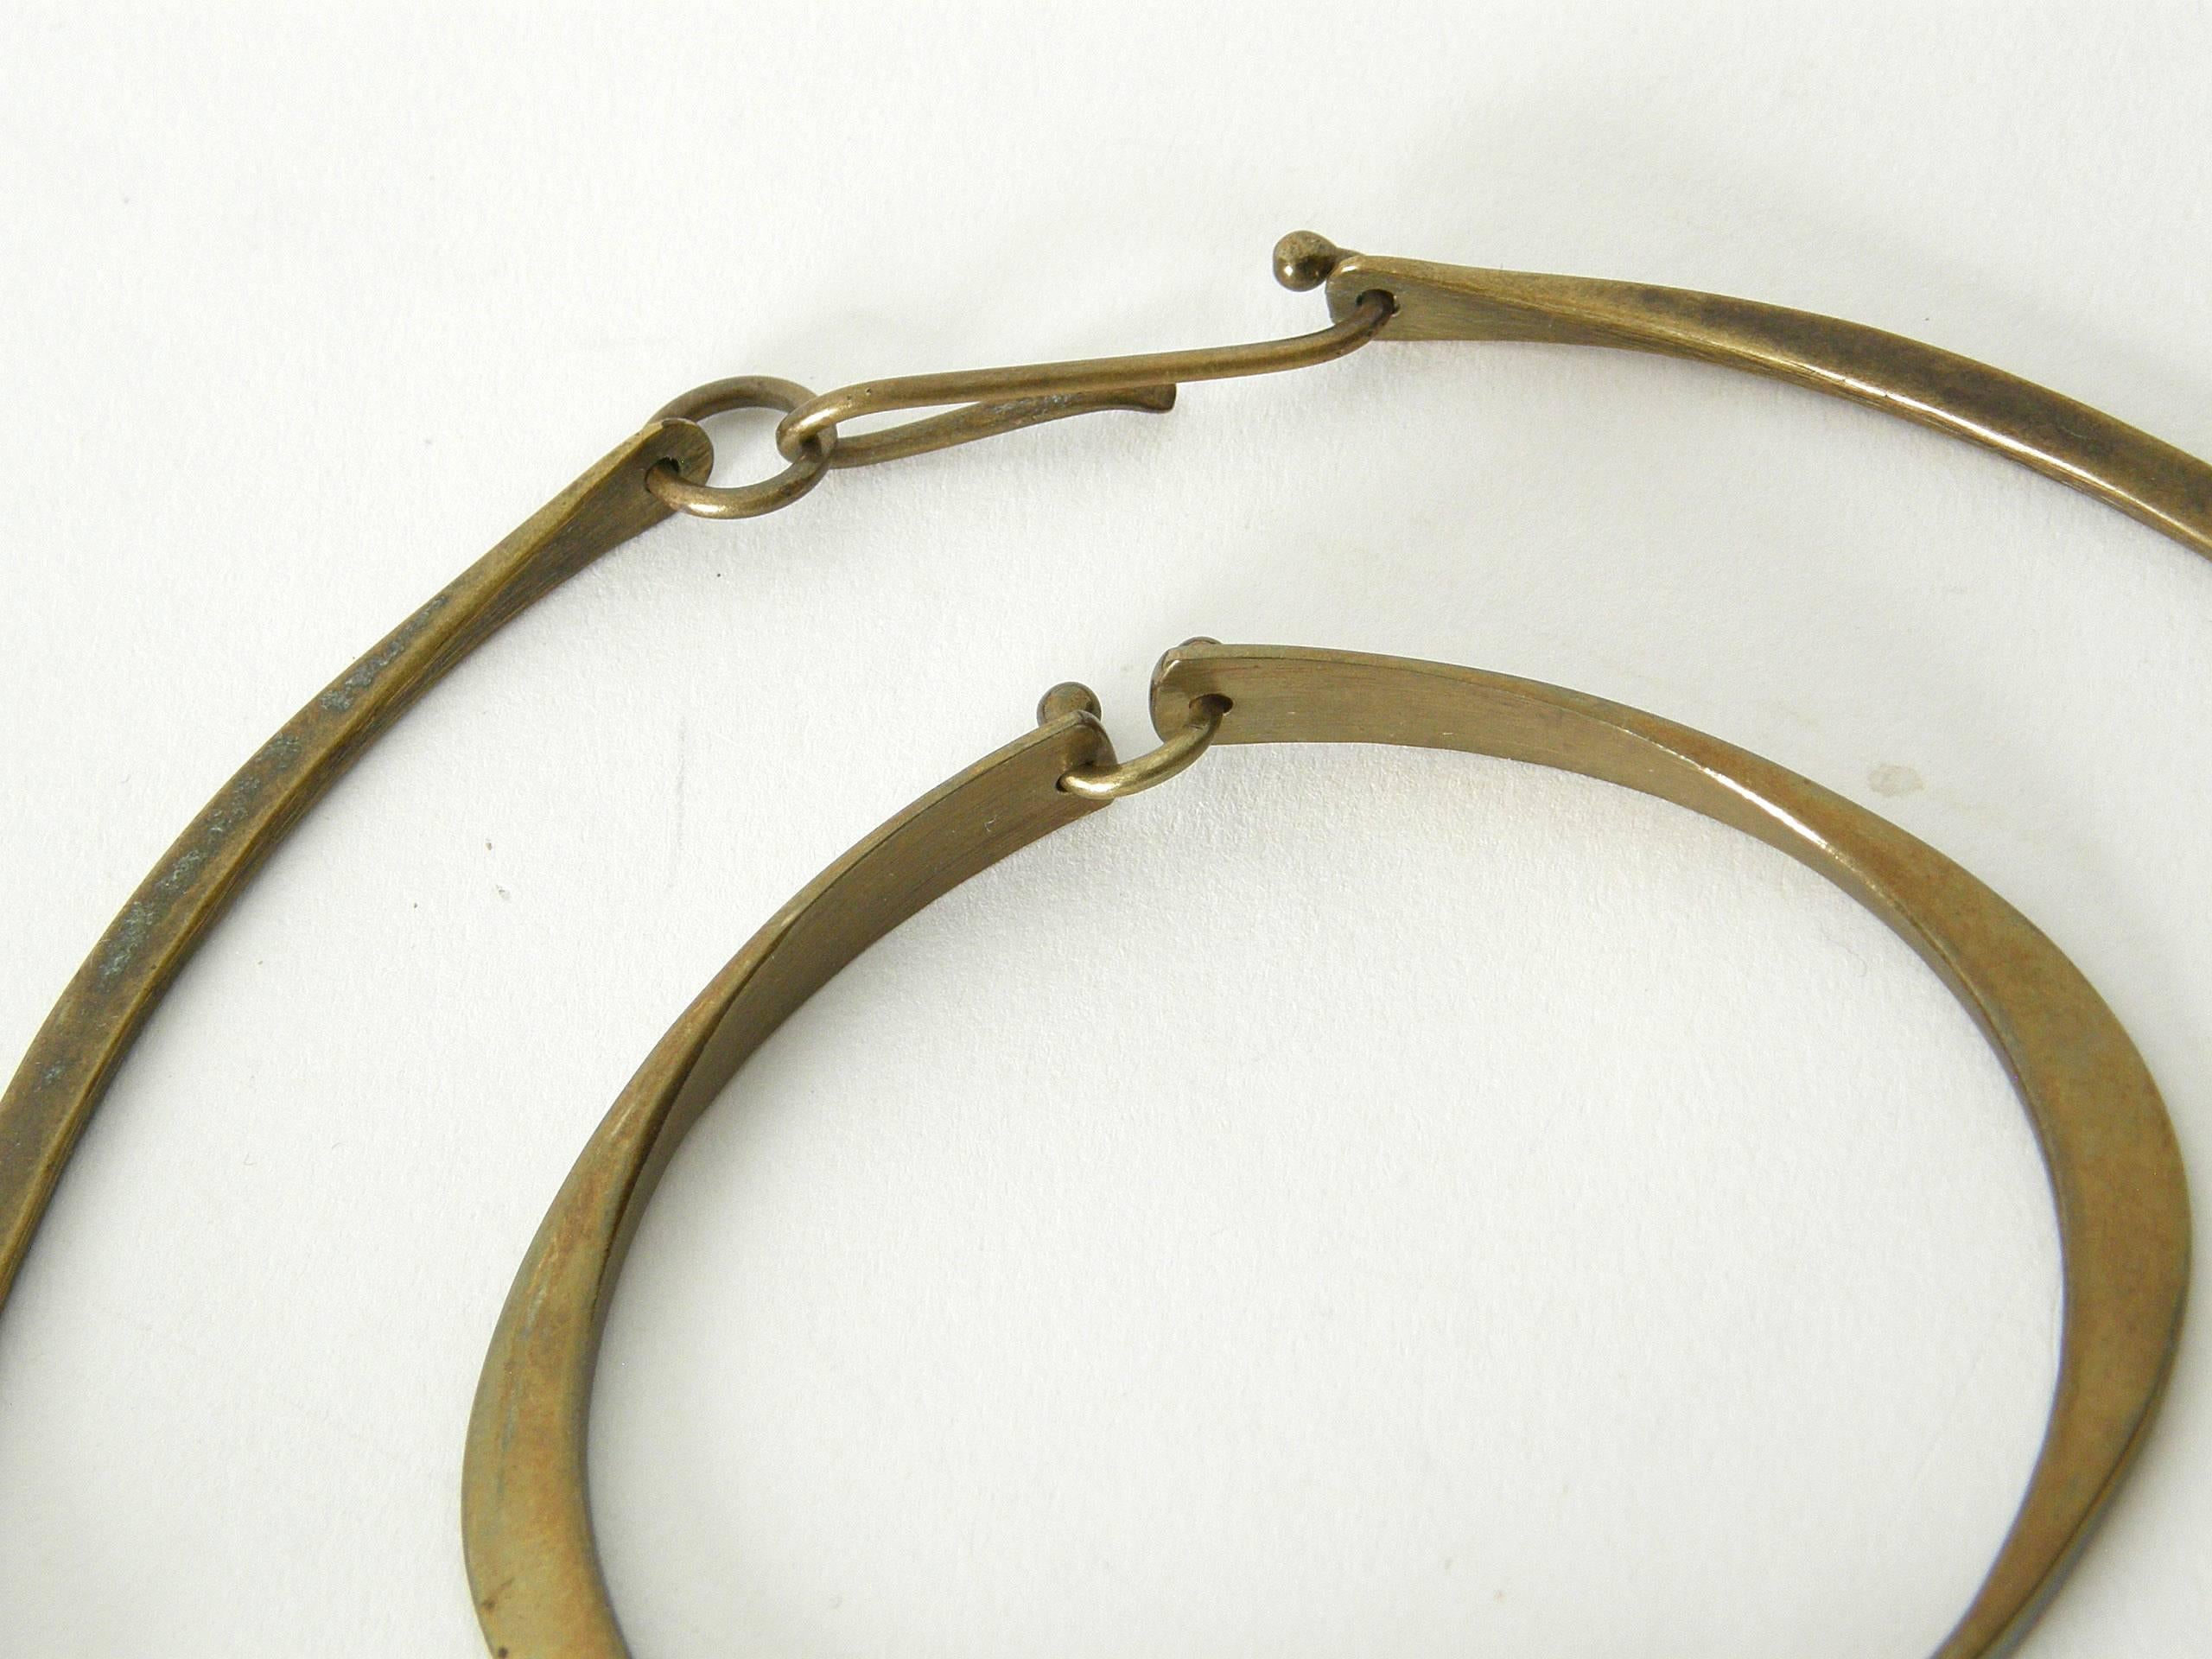 This hand wrought, sculptural bronze set attributed to Jack Boyd combines an organic modern simplicity with a hint of brutalism. The elegantly curved sections of the neck ring and bracelet are joined by playful wire links. The pendant features a